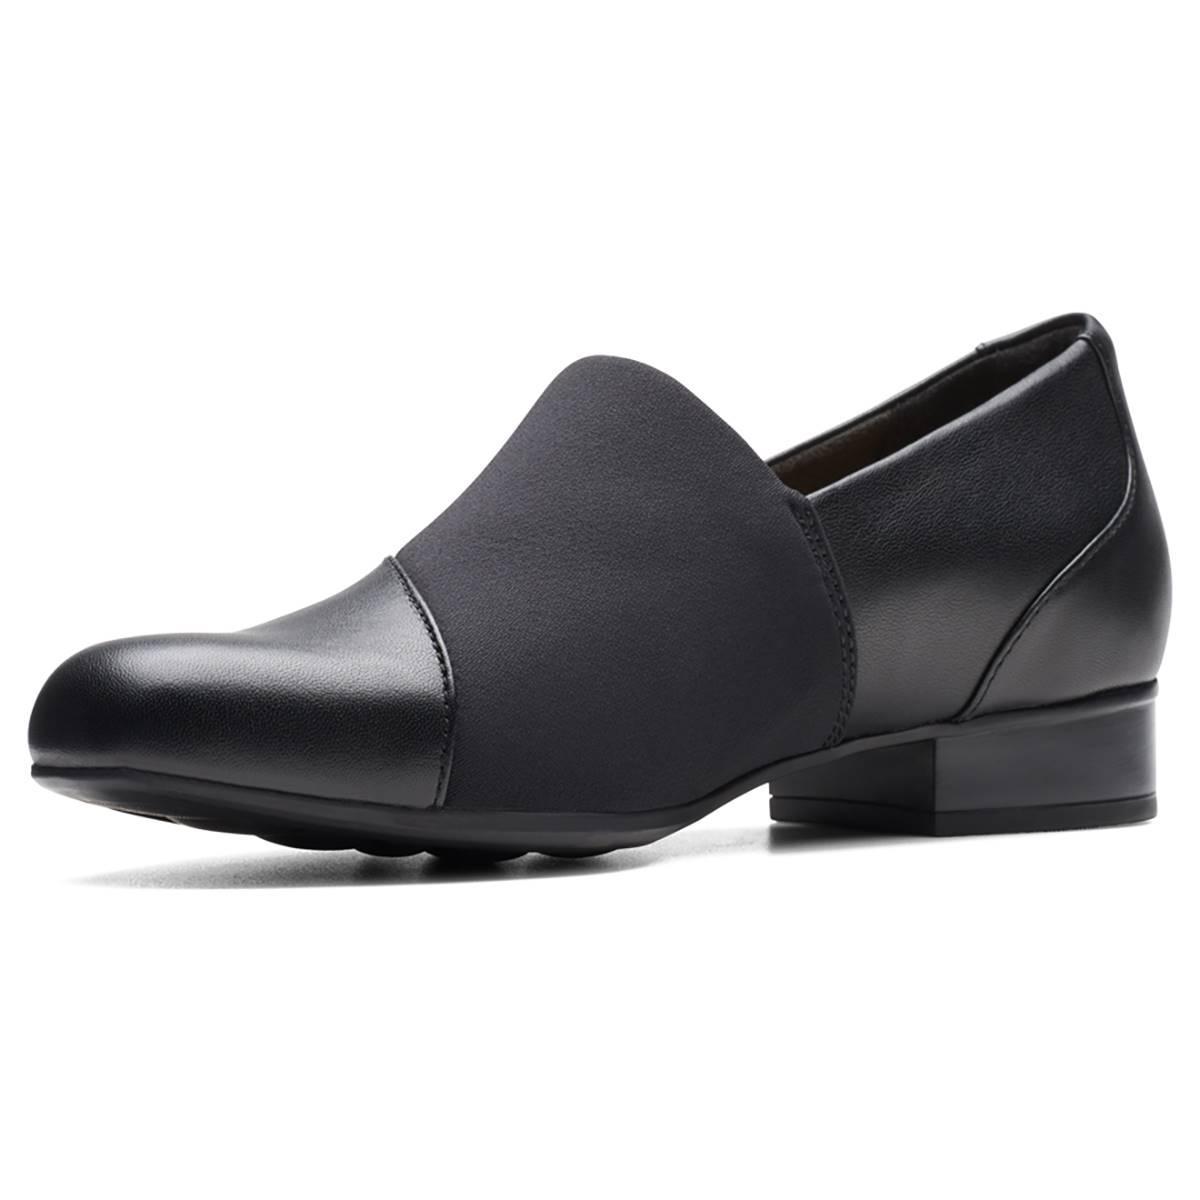 Bruno Magli Silas Penny Loafer Product Image